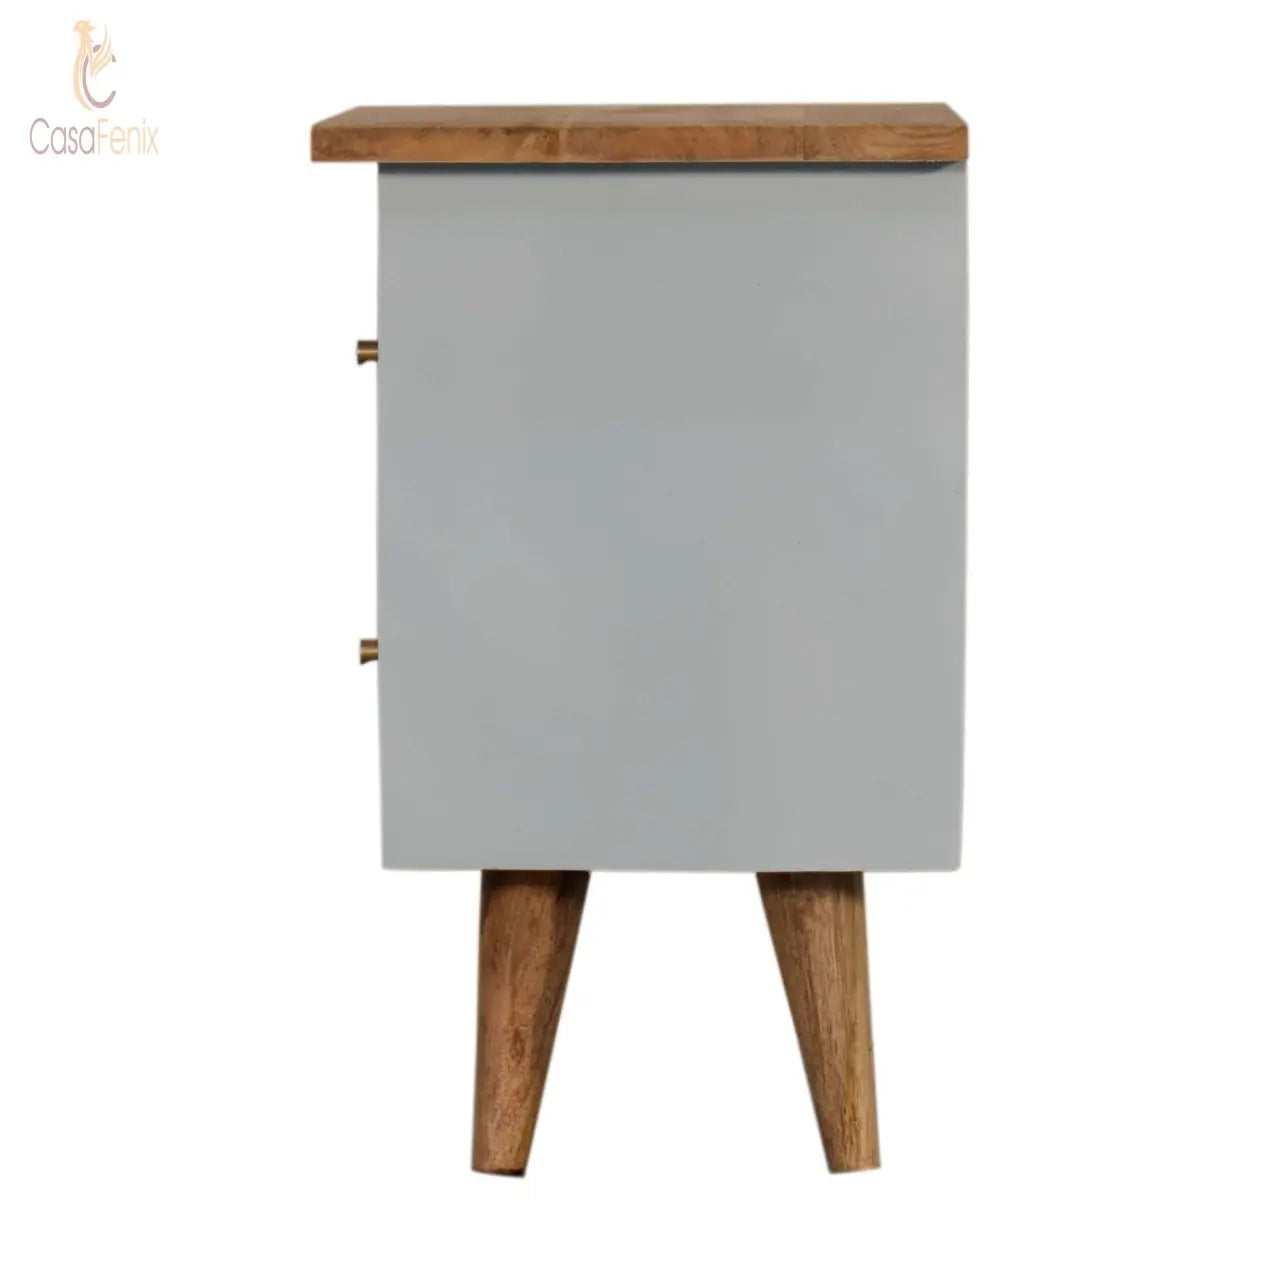 Sky Blue Hand Painted 2 Drawer Bedside Chest Wood Top Solid Mango Wood - CasaFenix